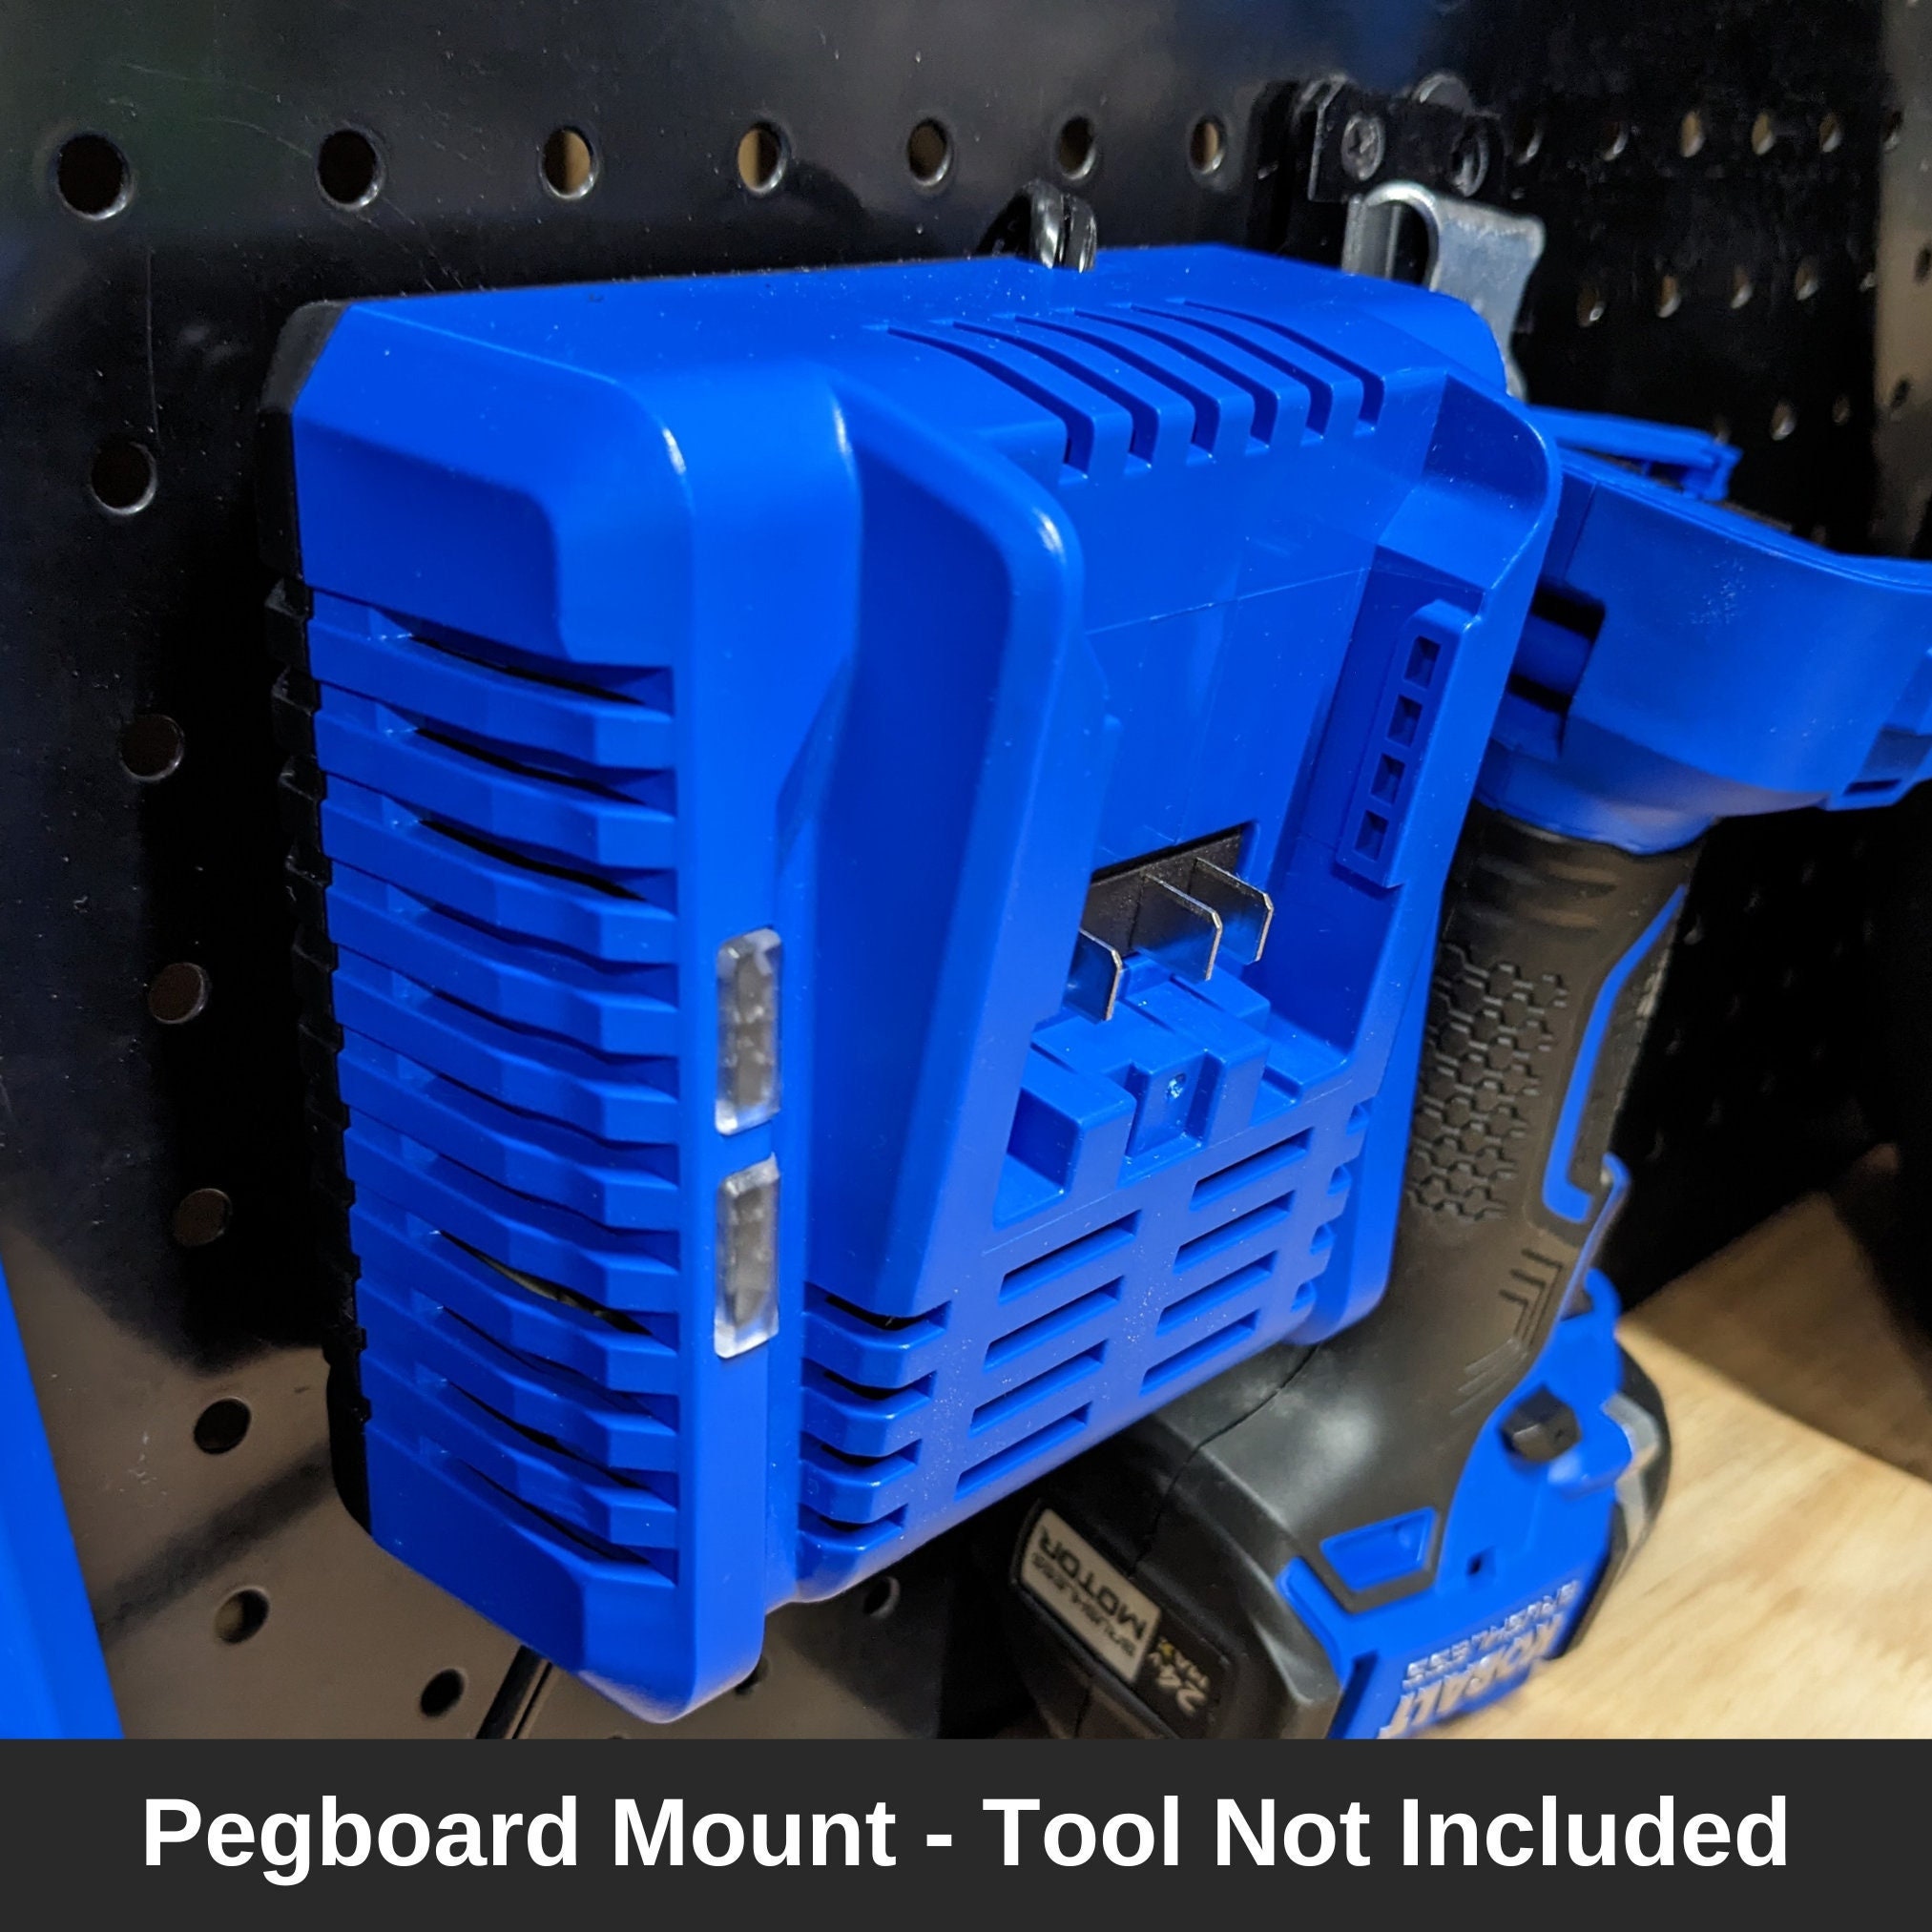 3D Printed Hinge System Accessory for Kobalt Mini Toolbox not